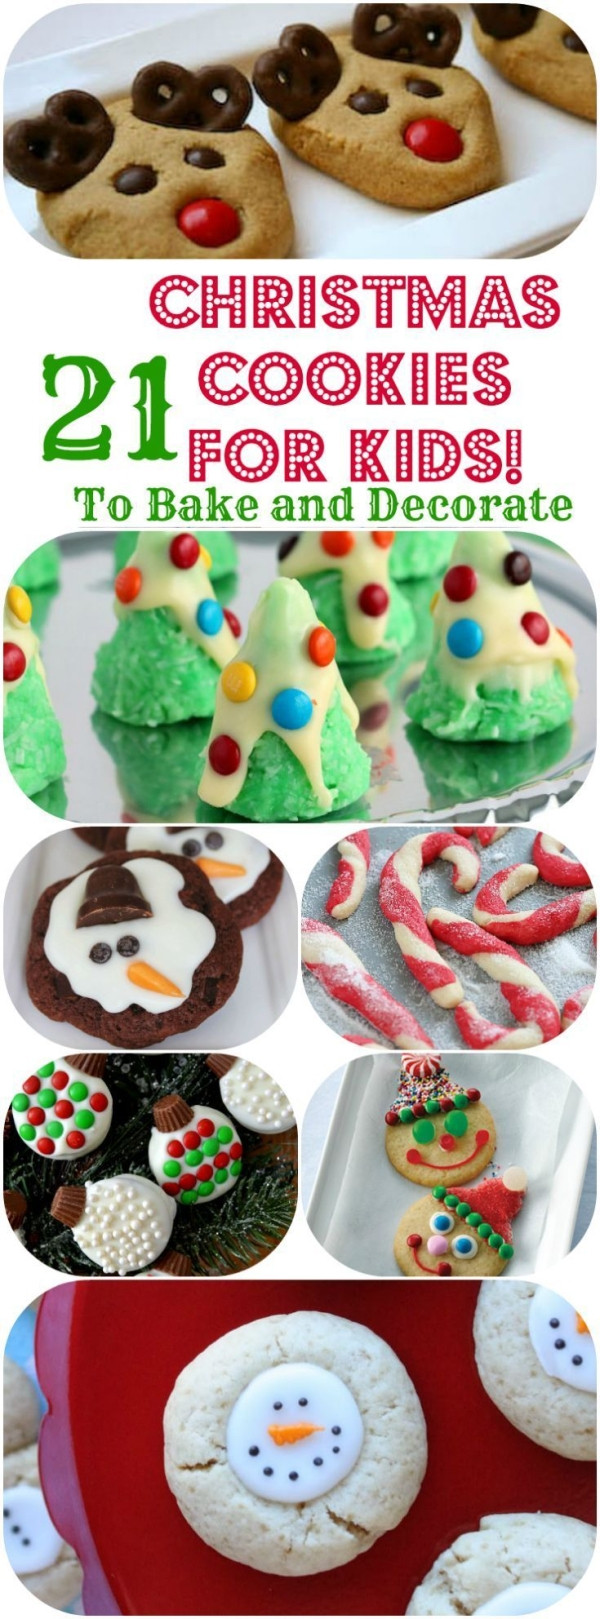 Easy Bake Christmas Cookies
 Easy Christmas Cookie recipes for Kids to Bake or Decorate